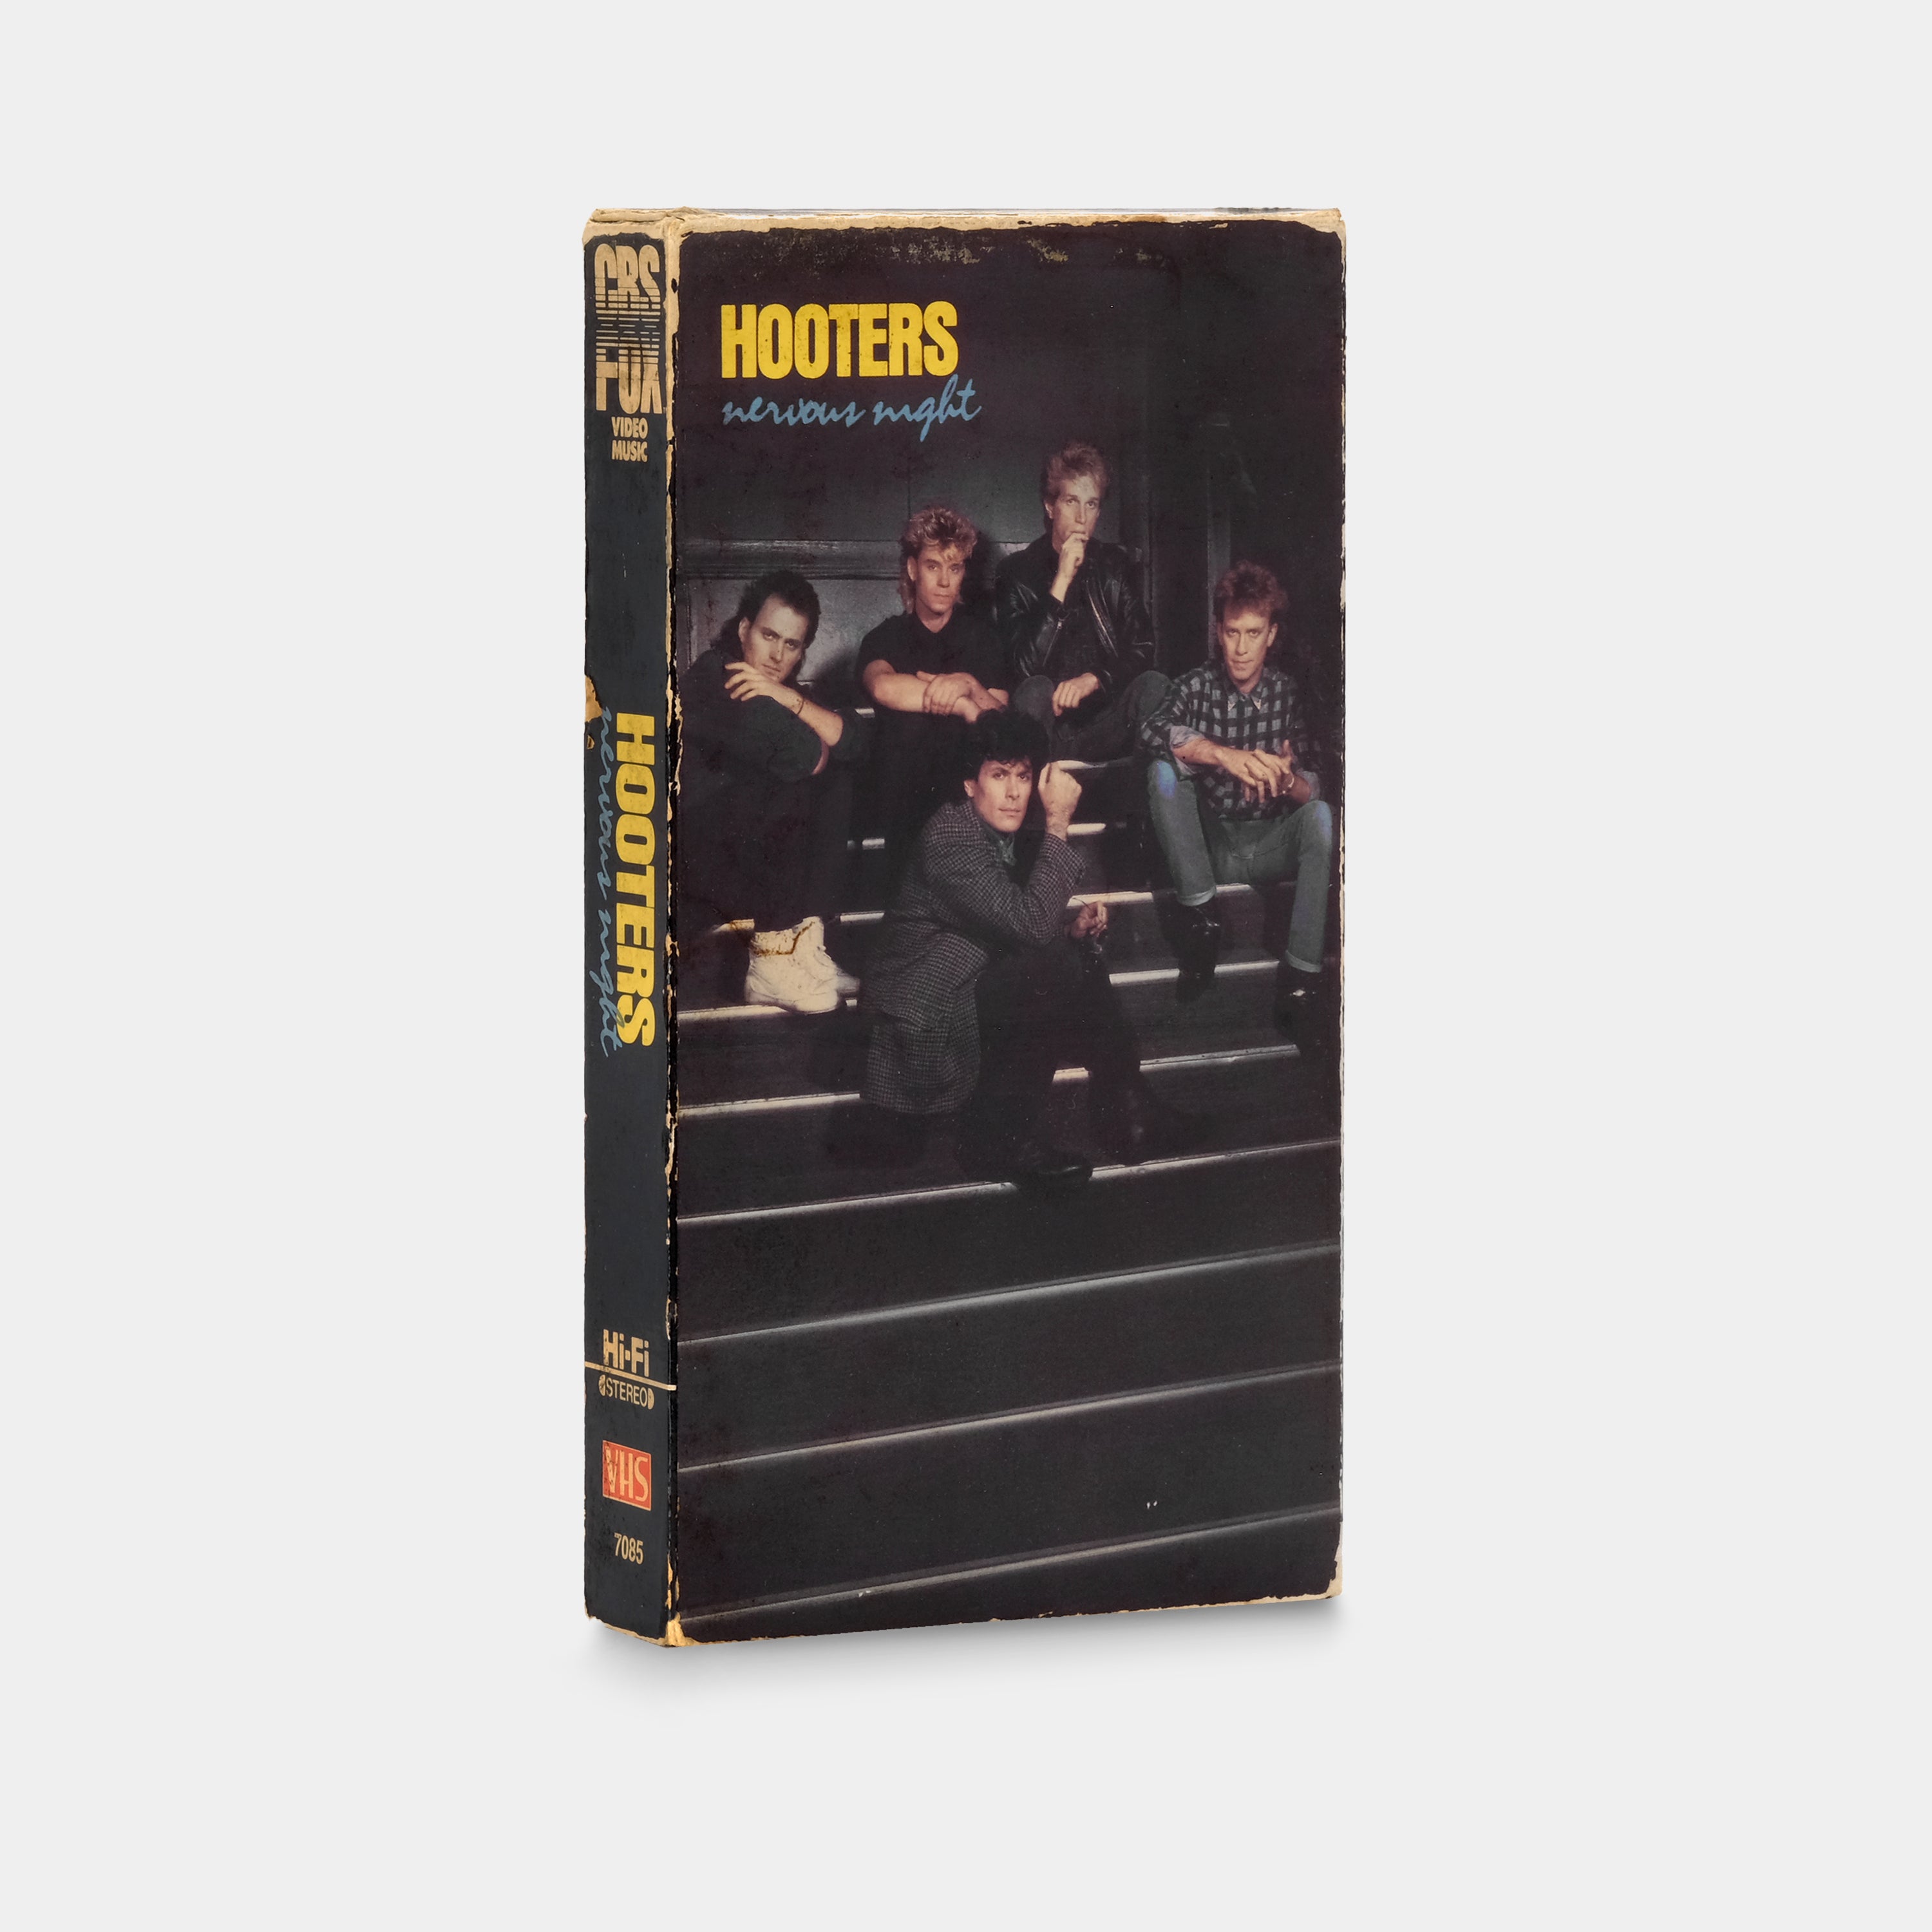 The Hooters: Nervous Night VHS Tape